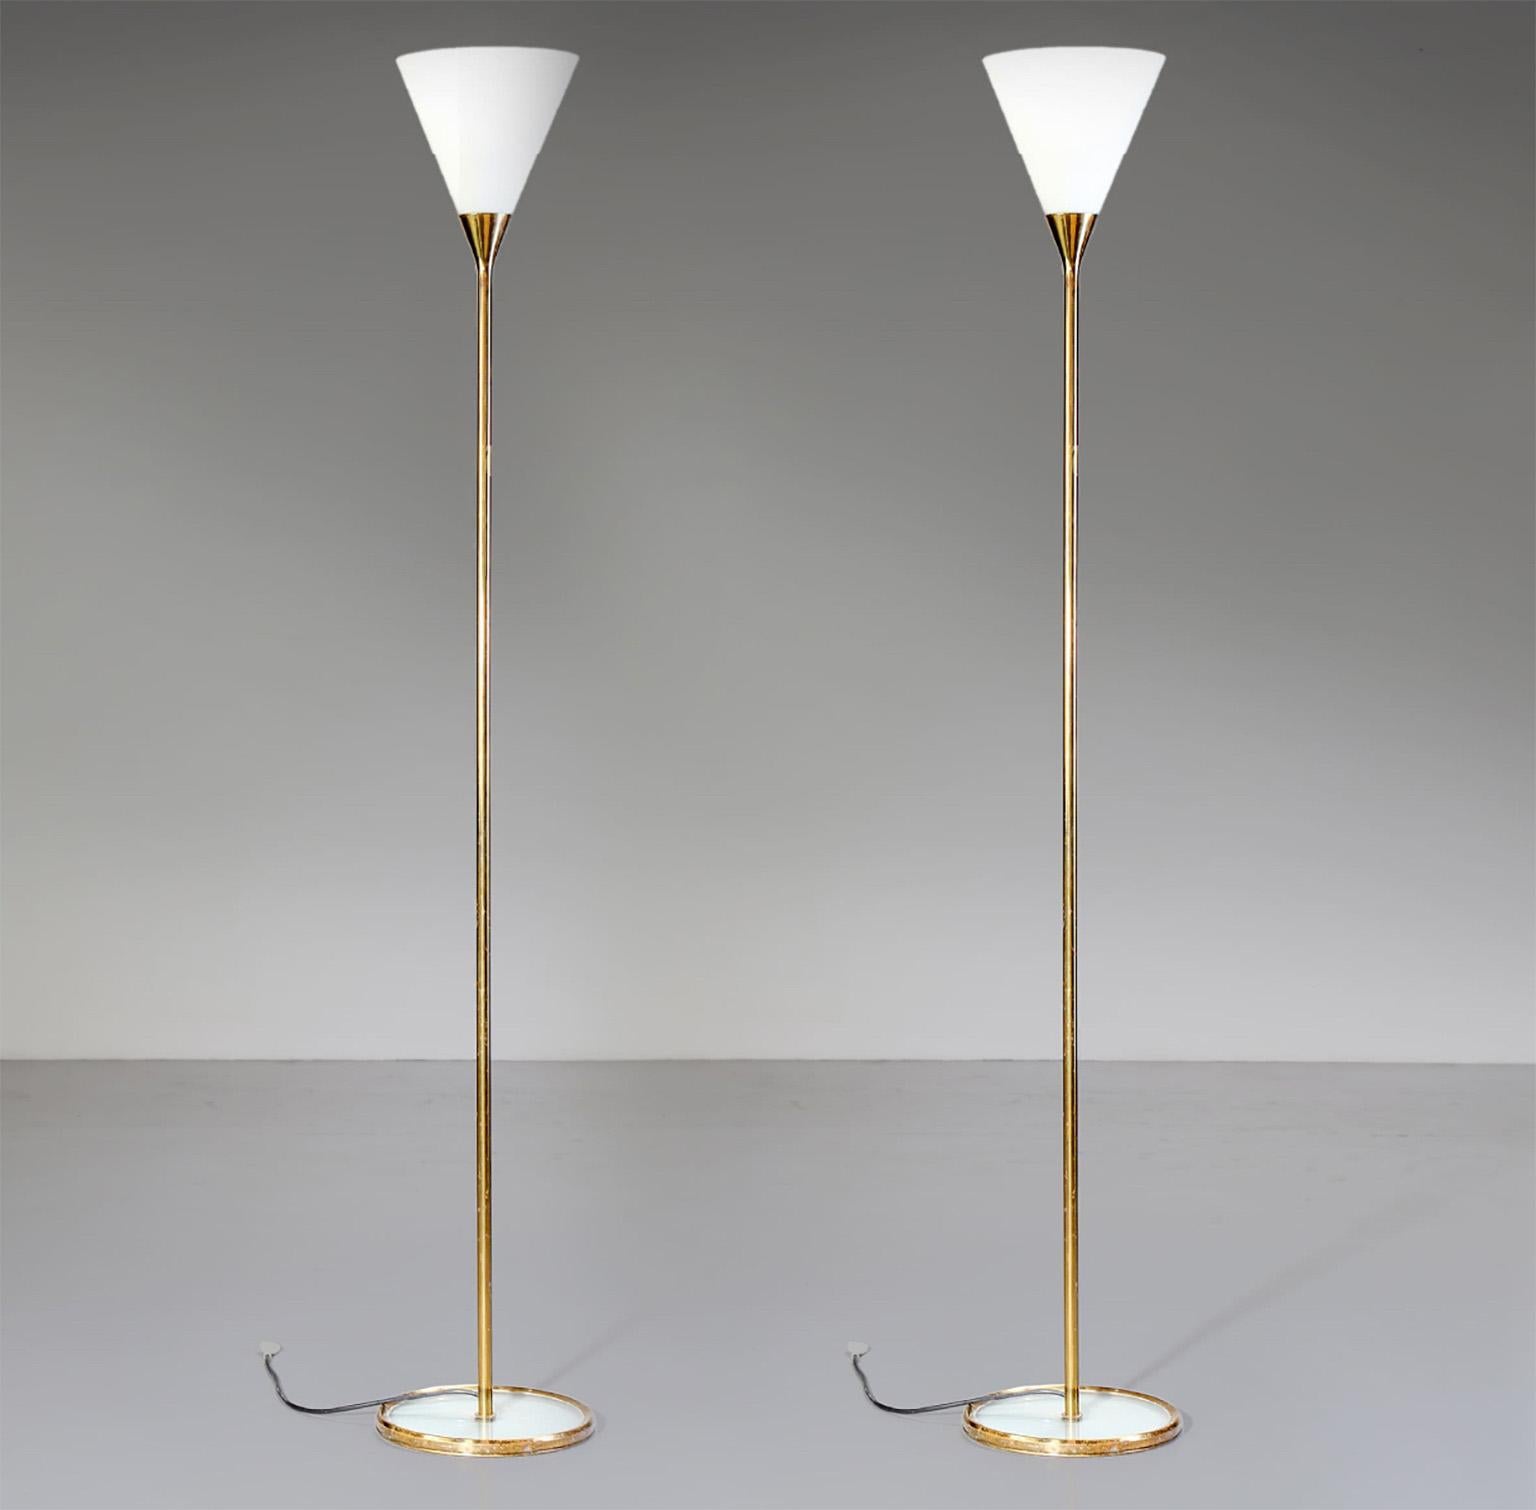 Rare pair of fine Fontana Arte floor lamps mod. 2003 designed by Max Ingrand in 1950s for Fontana Arte in Milano.
The pure line of the insert between brass stand and the glass reflector cone characterize this special design as ever modern and